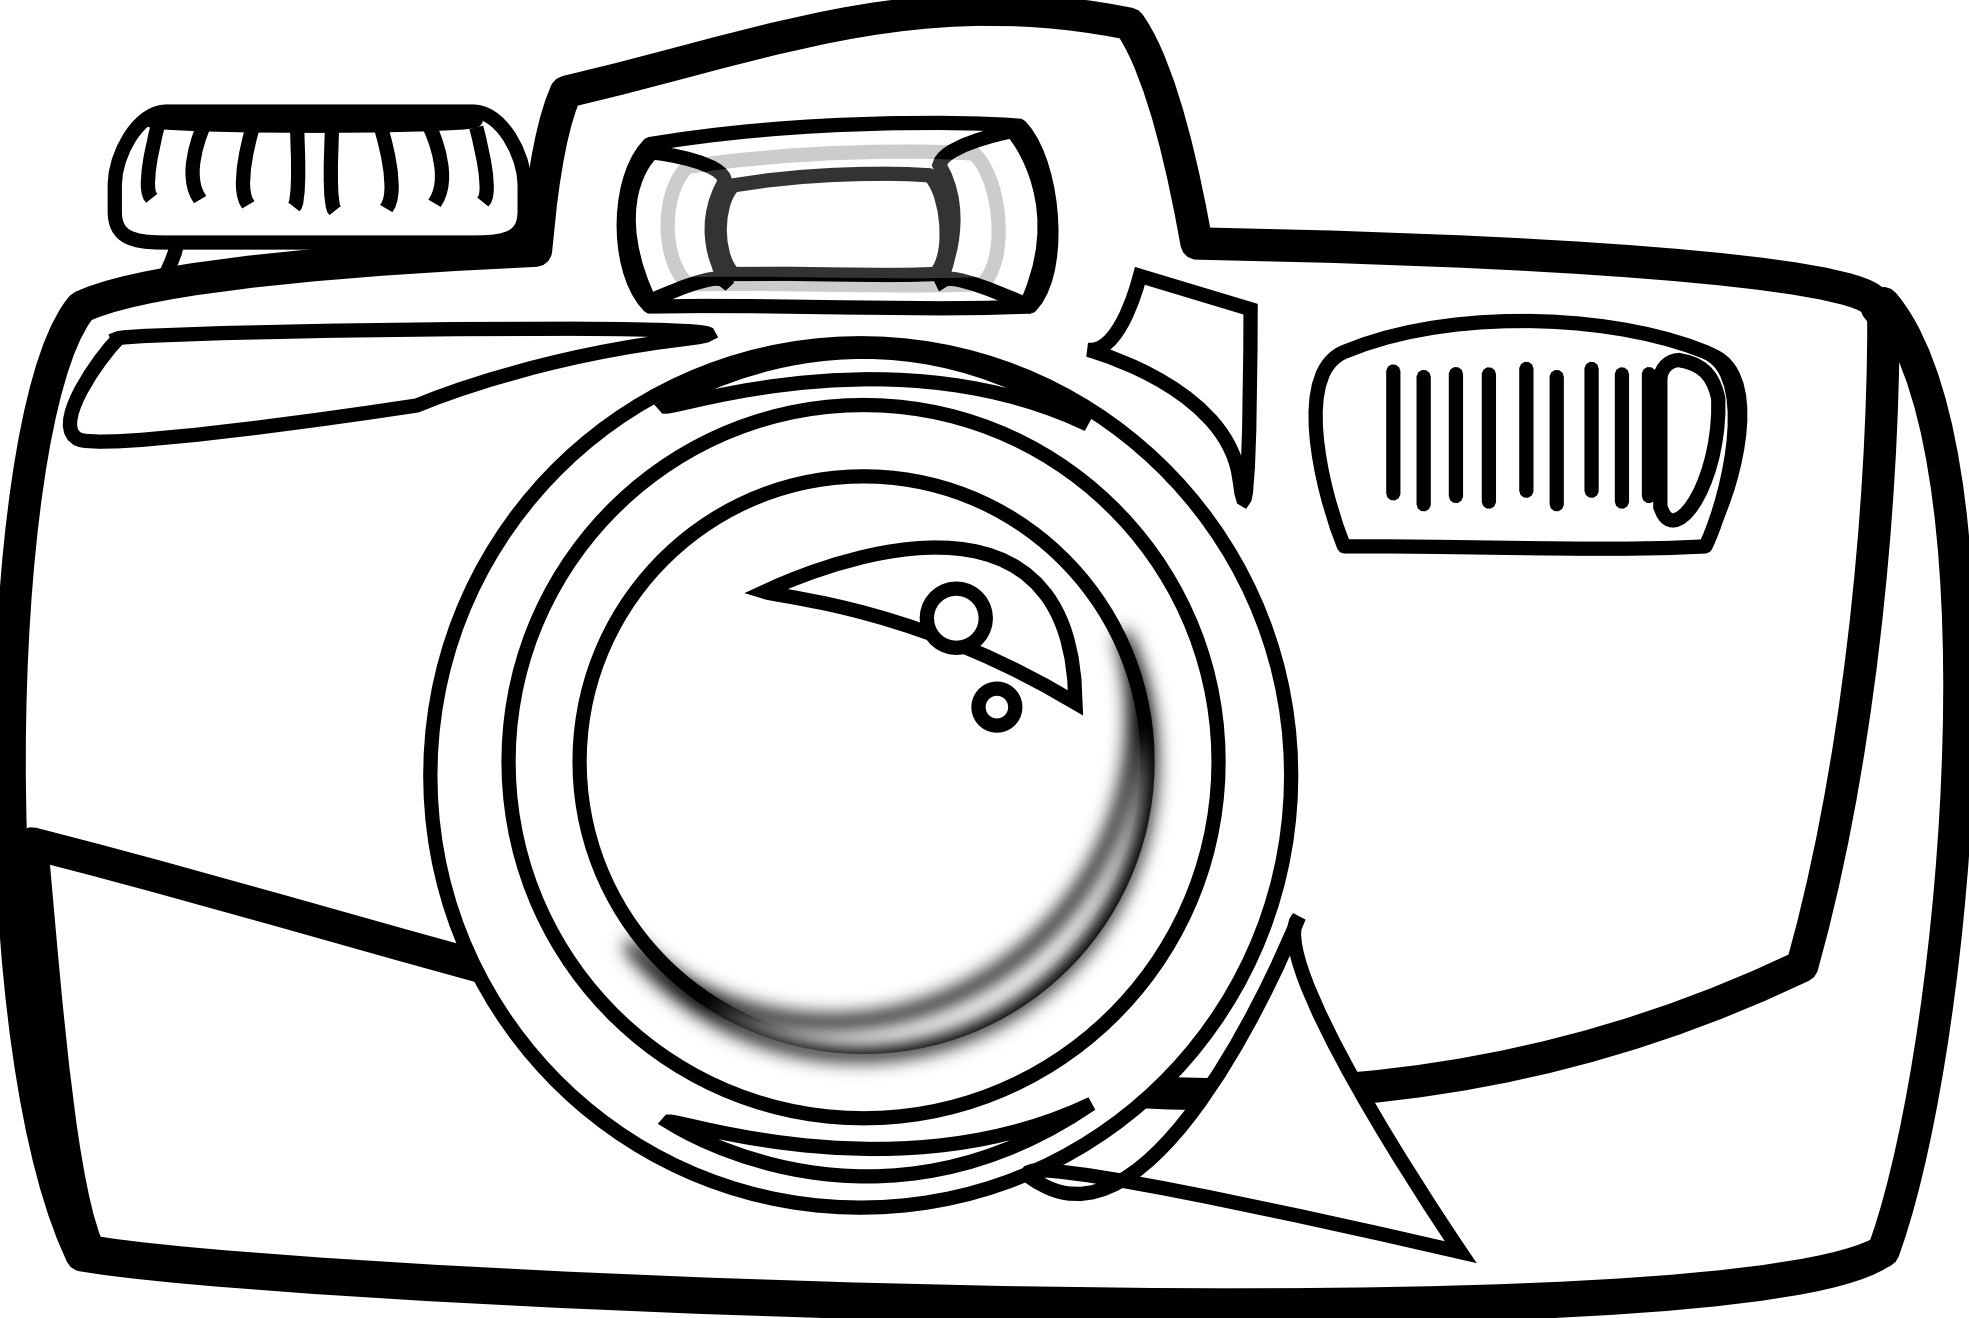 clipart of camera black and white - photo #13